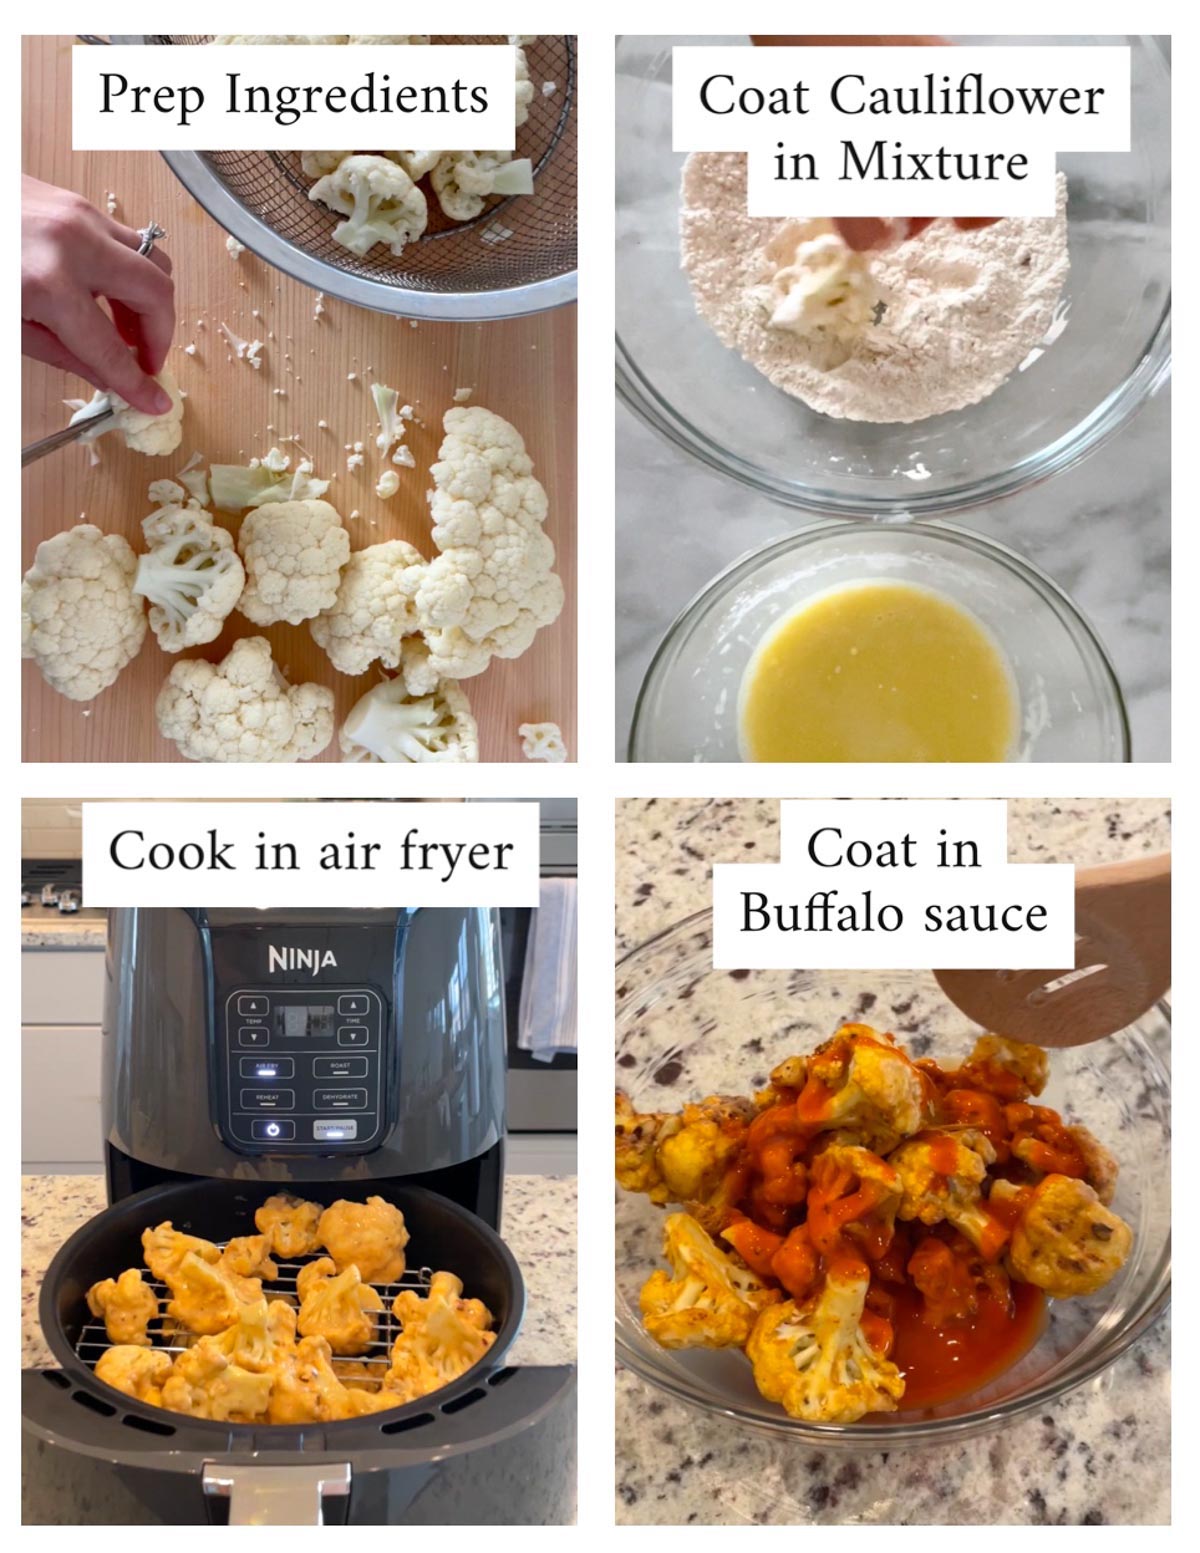 Labeled pictures with the steps to make buffalo cauliflower in the air fryer including: prep ingredients: coat cauliflower in mixture, cook in air fryer, coat in buffalo sauce.